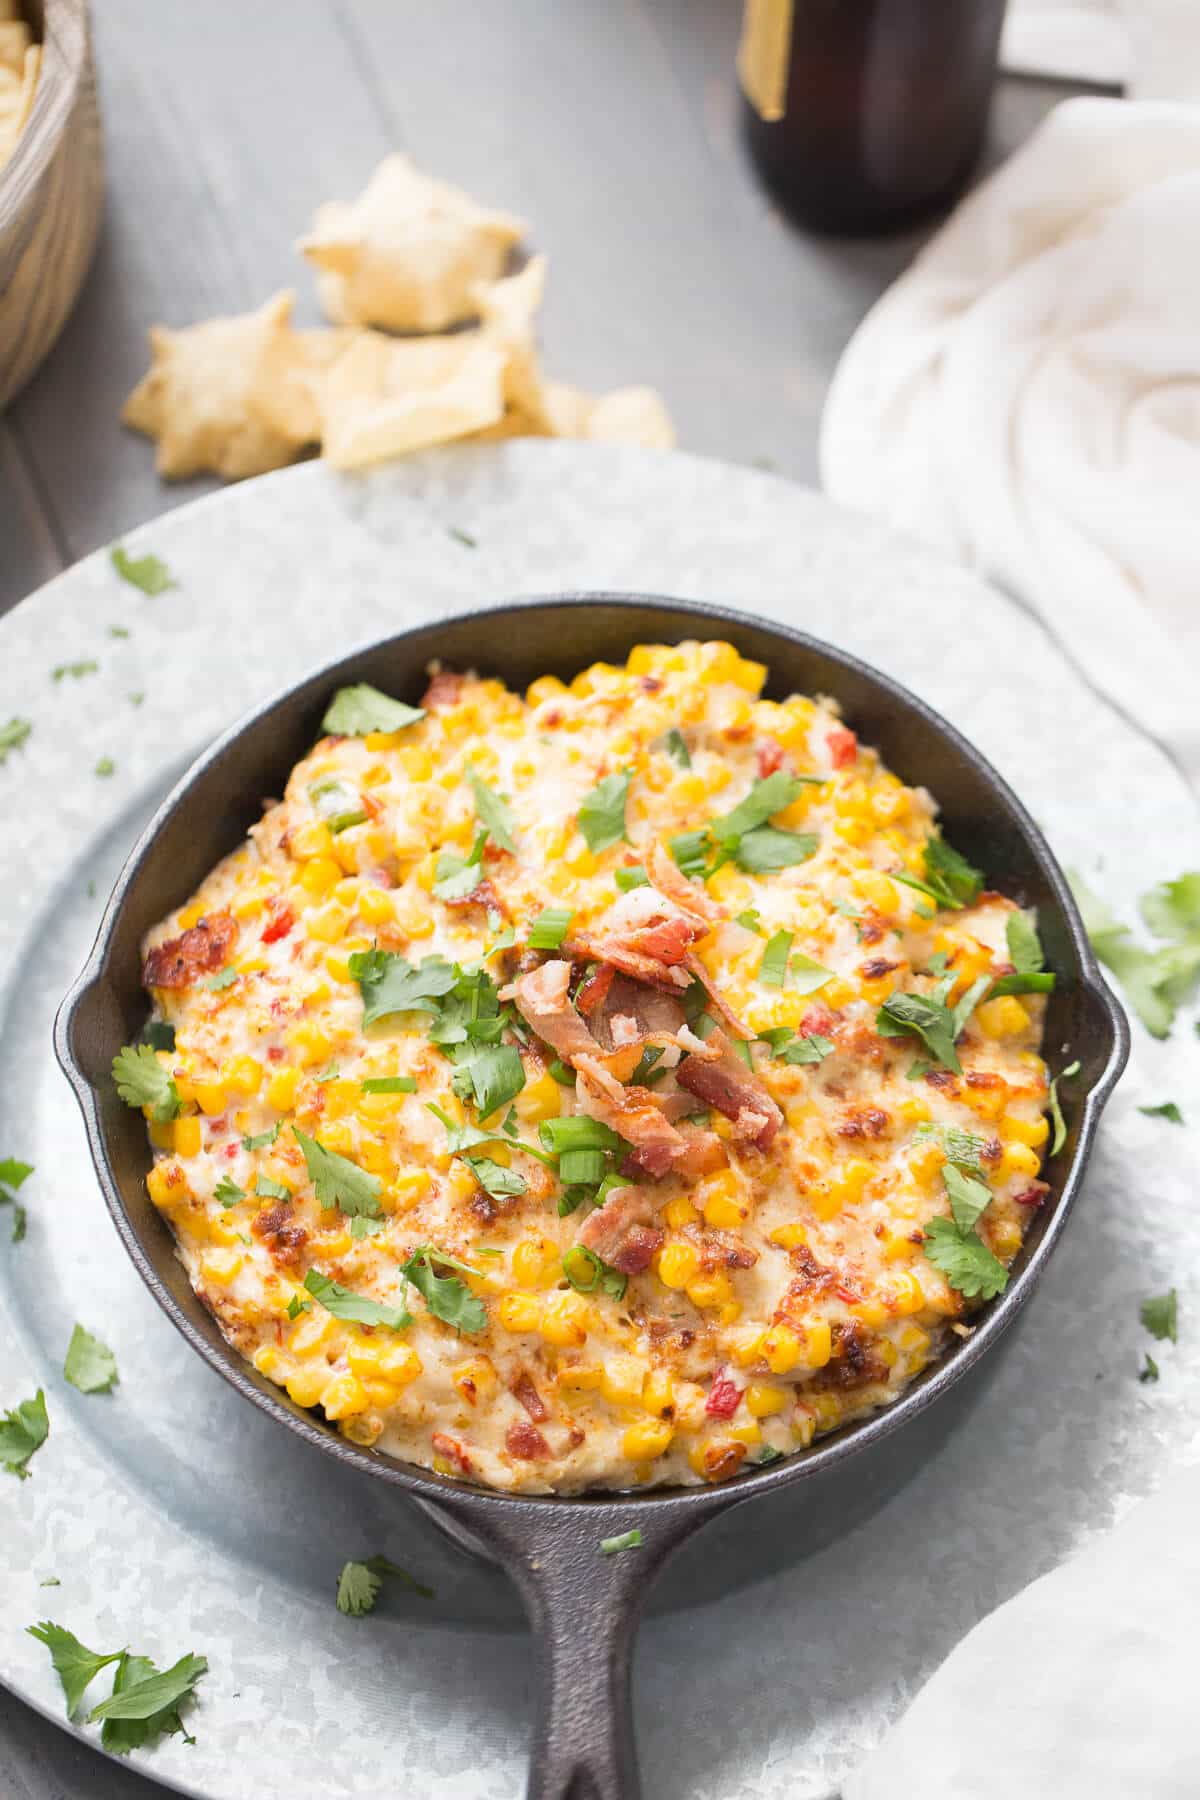 This hot corn dip is so easy and so good! It will be the first dip to disappear!